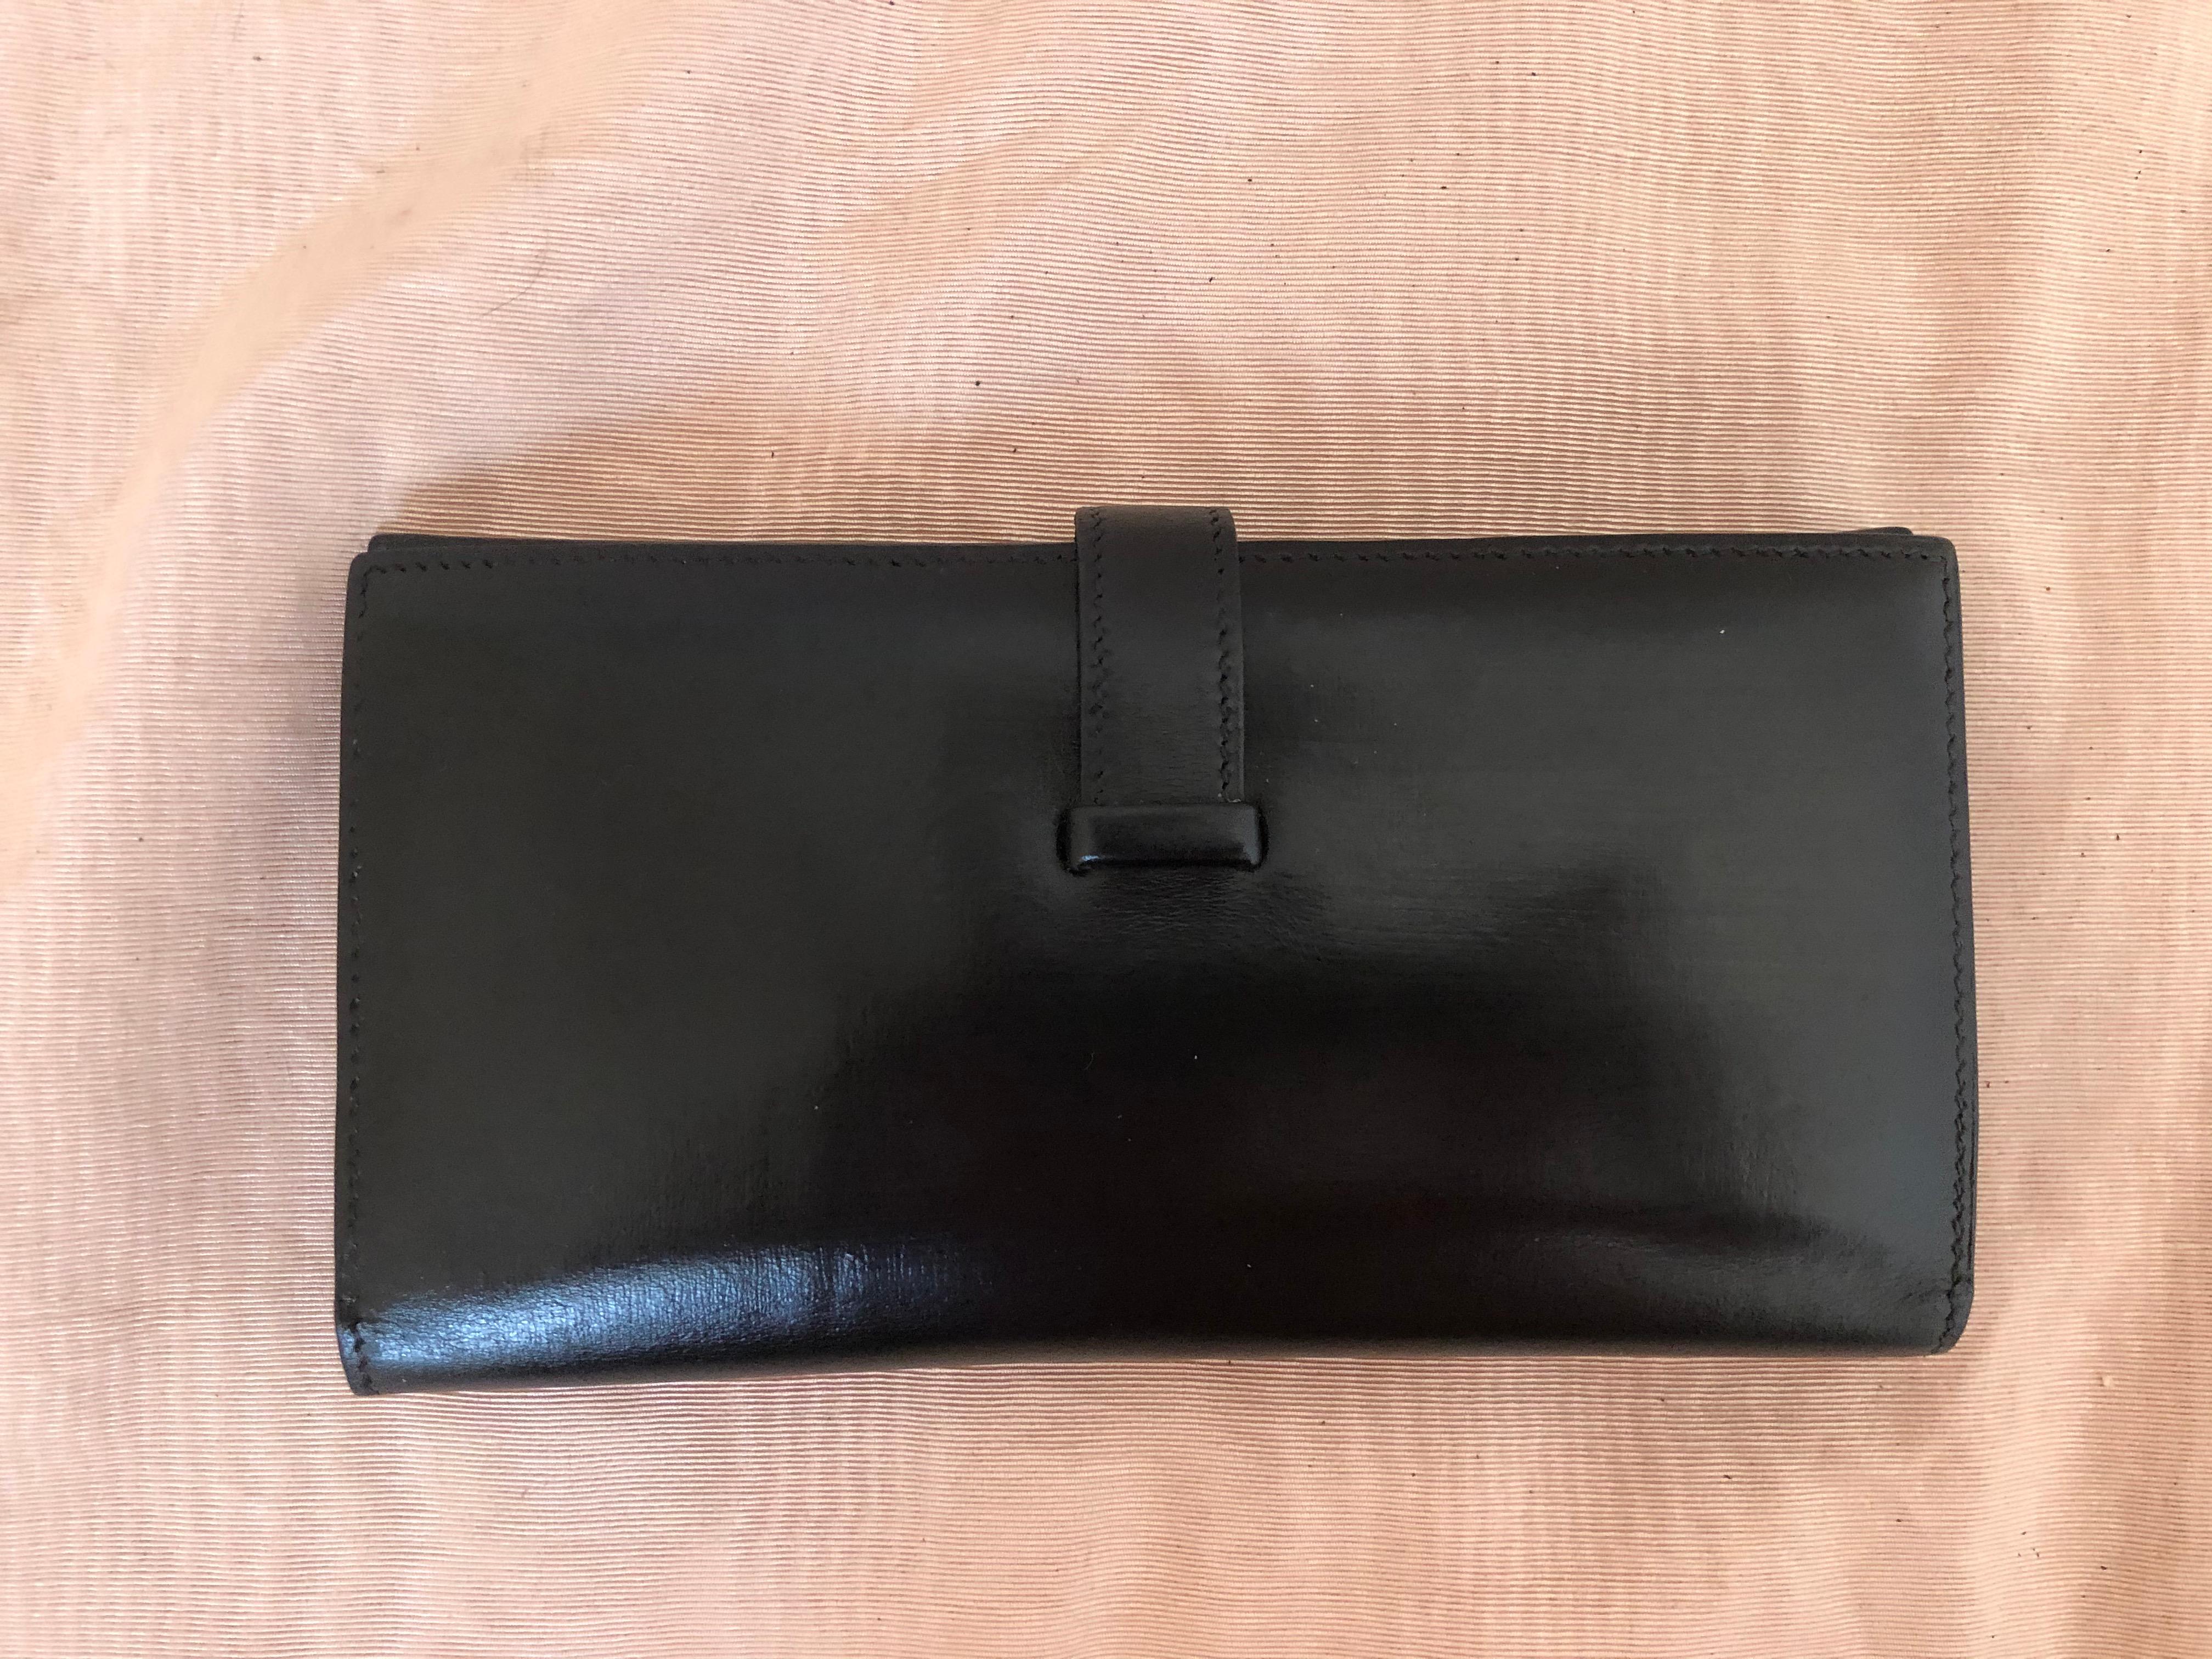 This Hermes Bearn Wallet is constructed of smooth leather with gold hardware. It has a front band closure; five card slots; two flat pockets; a zipper compartment, and two bill pockets.

I have marked it as in good condition as the zip pocket flap